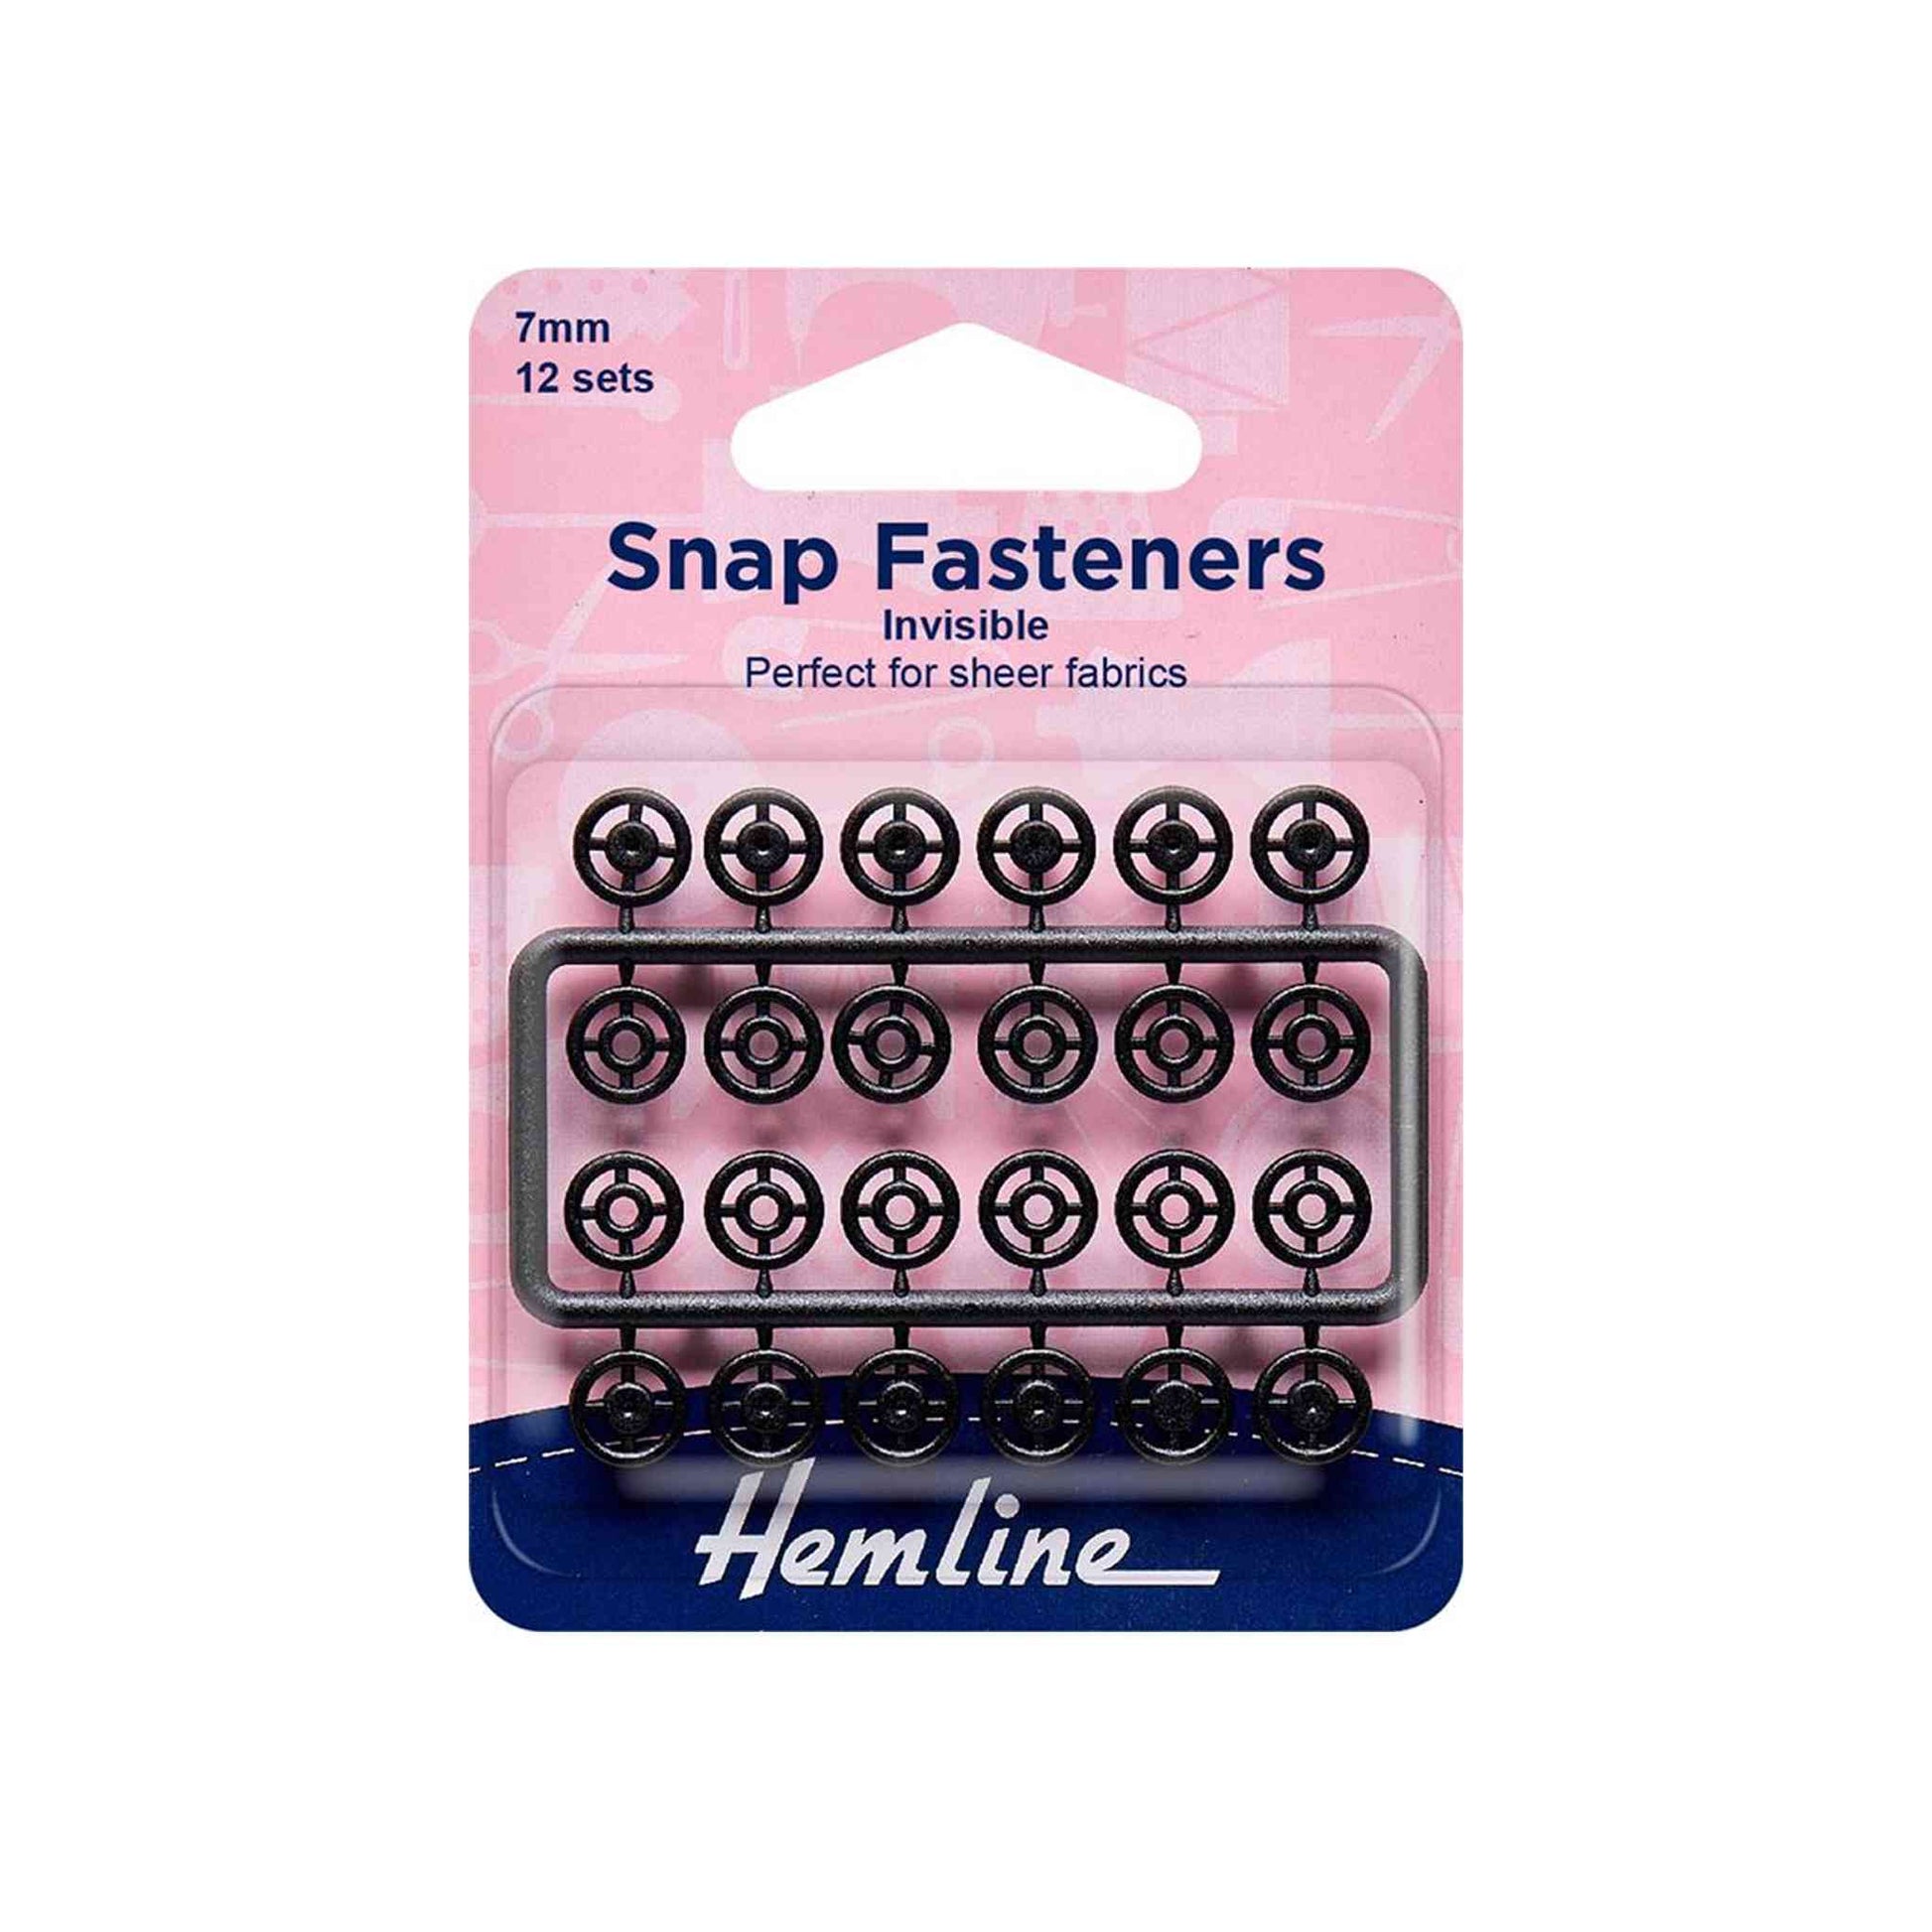 12 set packet of Hemline invisible snap fasteners to sew into garments. 7mm wide, black plastic.